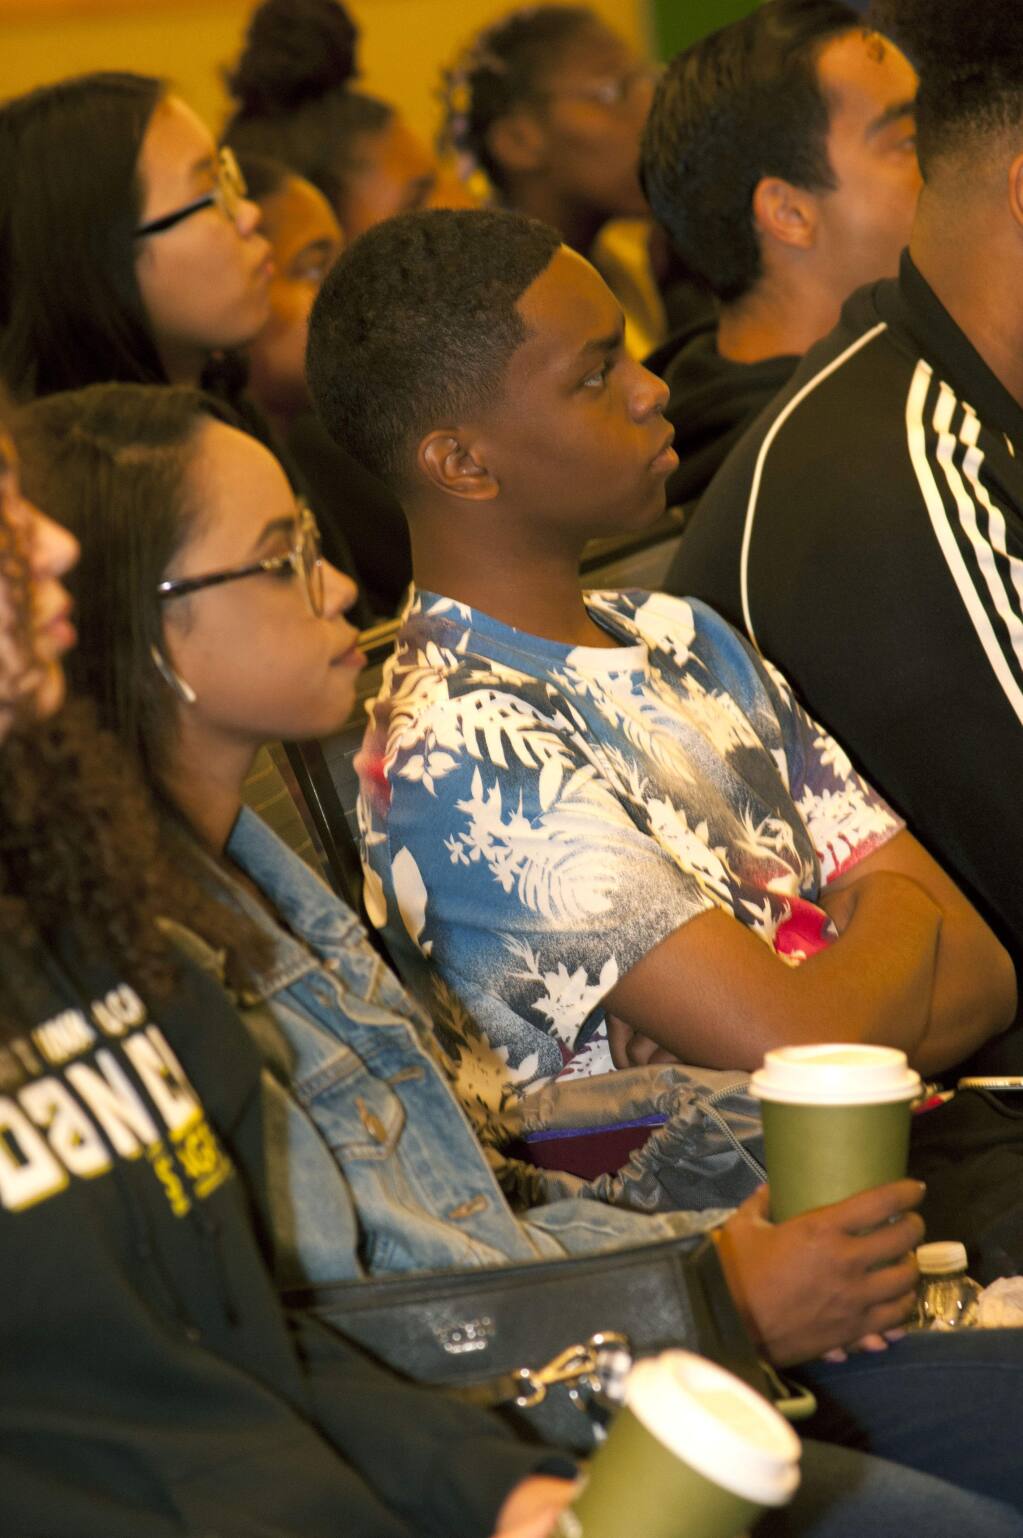 Students listen as keynote speaker George Hofstetter talks Saturday, Sept. 21, 2019, during the 2019 Youth Summit. The event was hosted by Sonoma State University's Black Student Union and the Sonoma County Black Forum. (Photo by Tanya Braunstein)